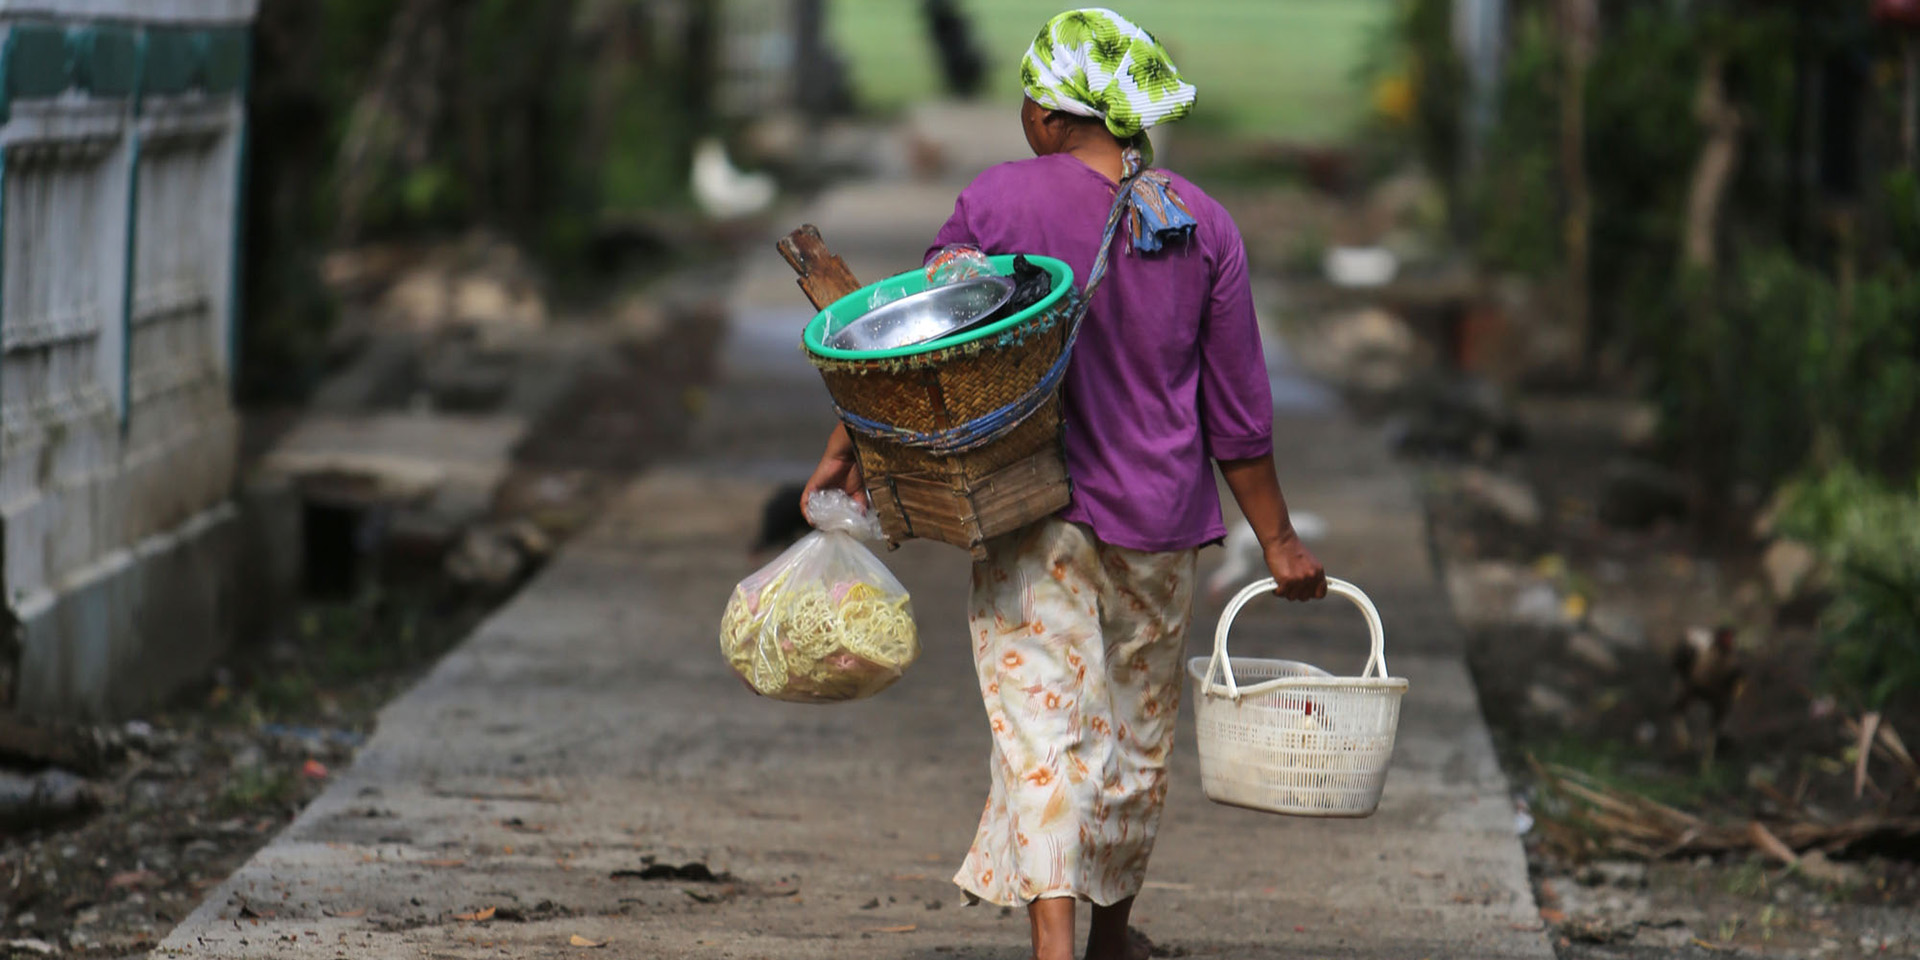 Image of a woman walking away on a paved road carrying several baskets and a bag.